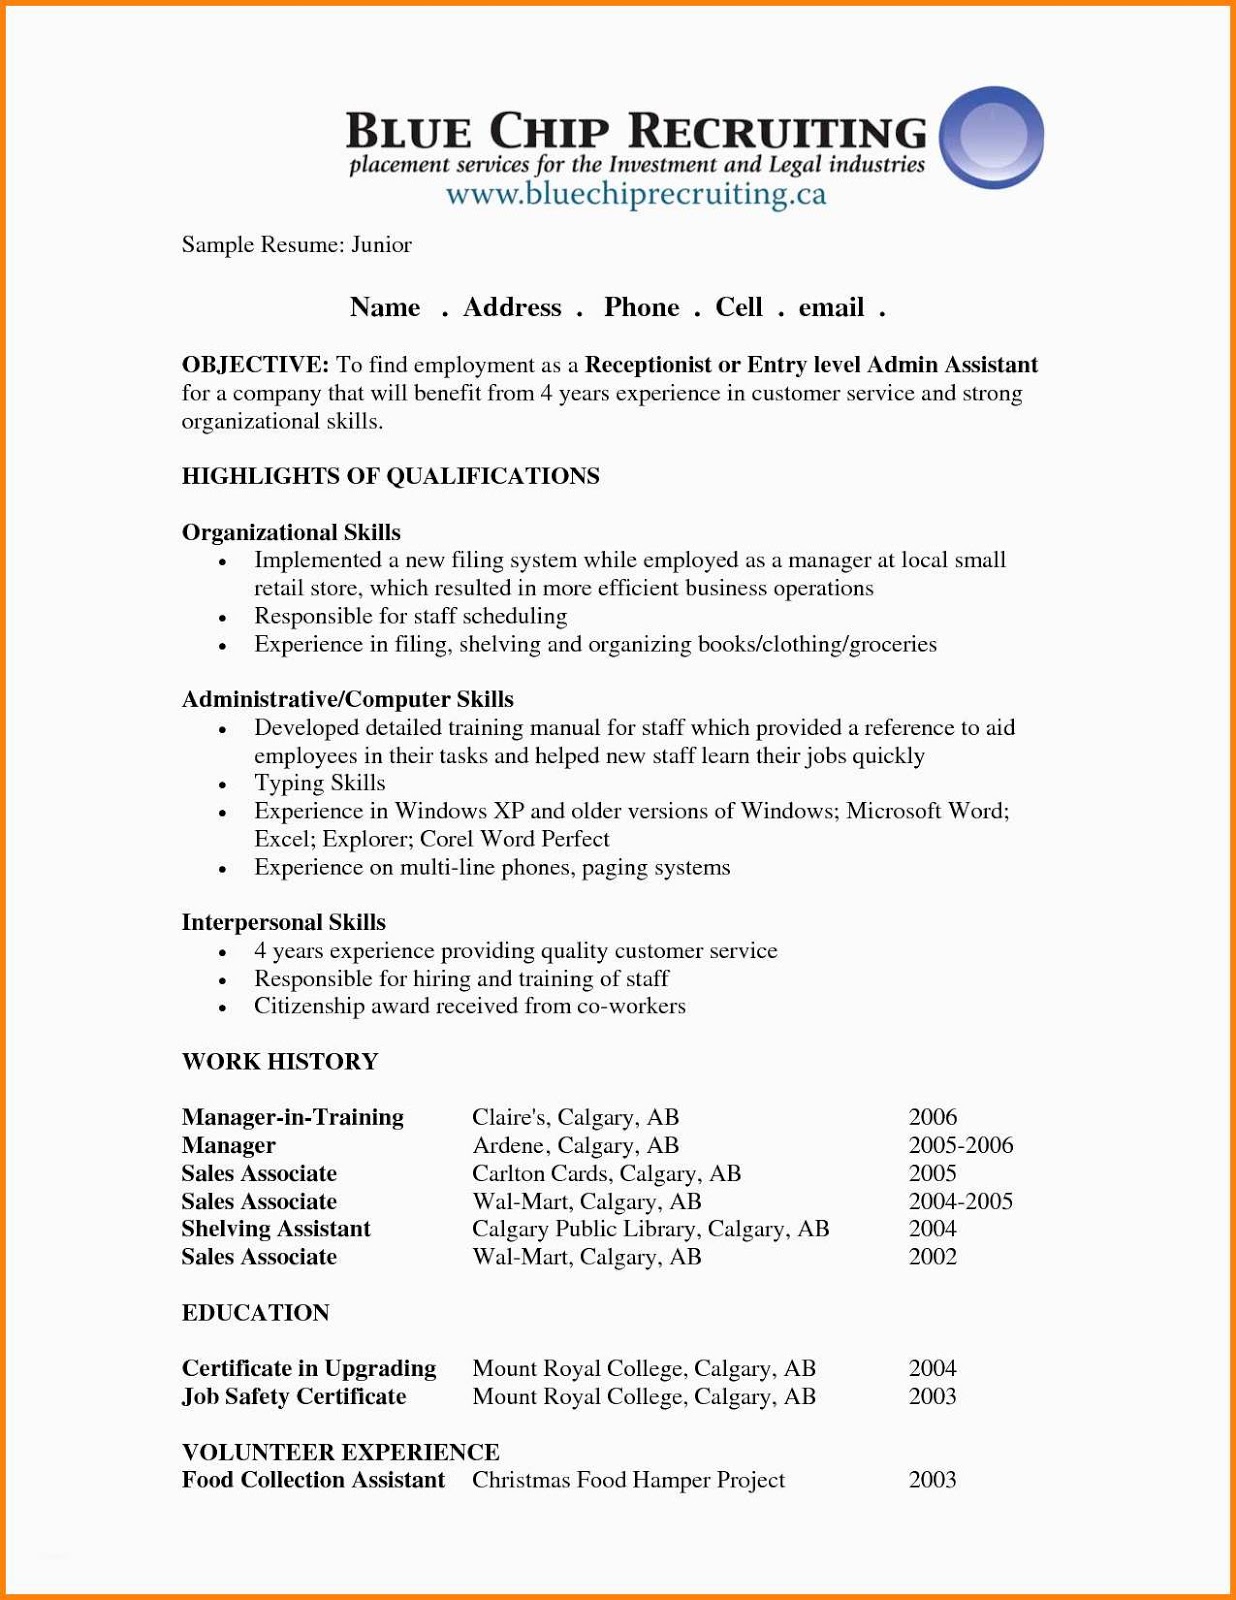 Administrative Assistant Resume Summary, administrative assistant resume summary examples, administrative assistant resume summary 2019